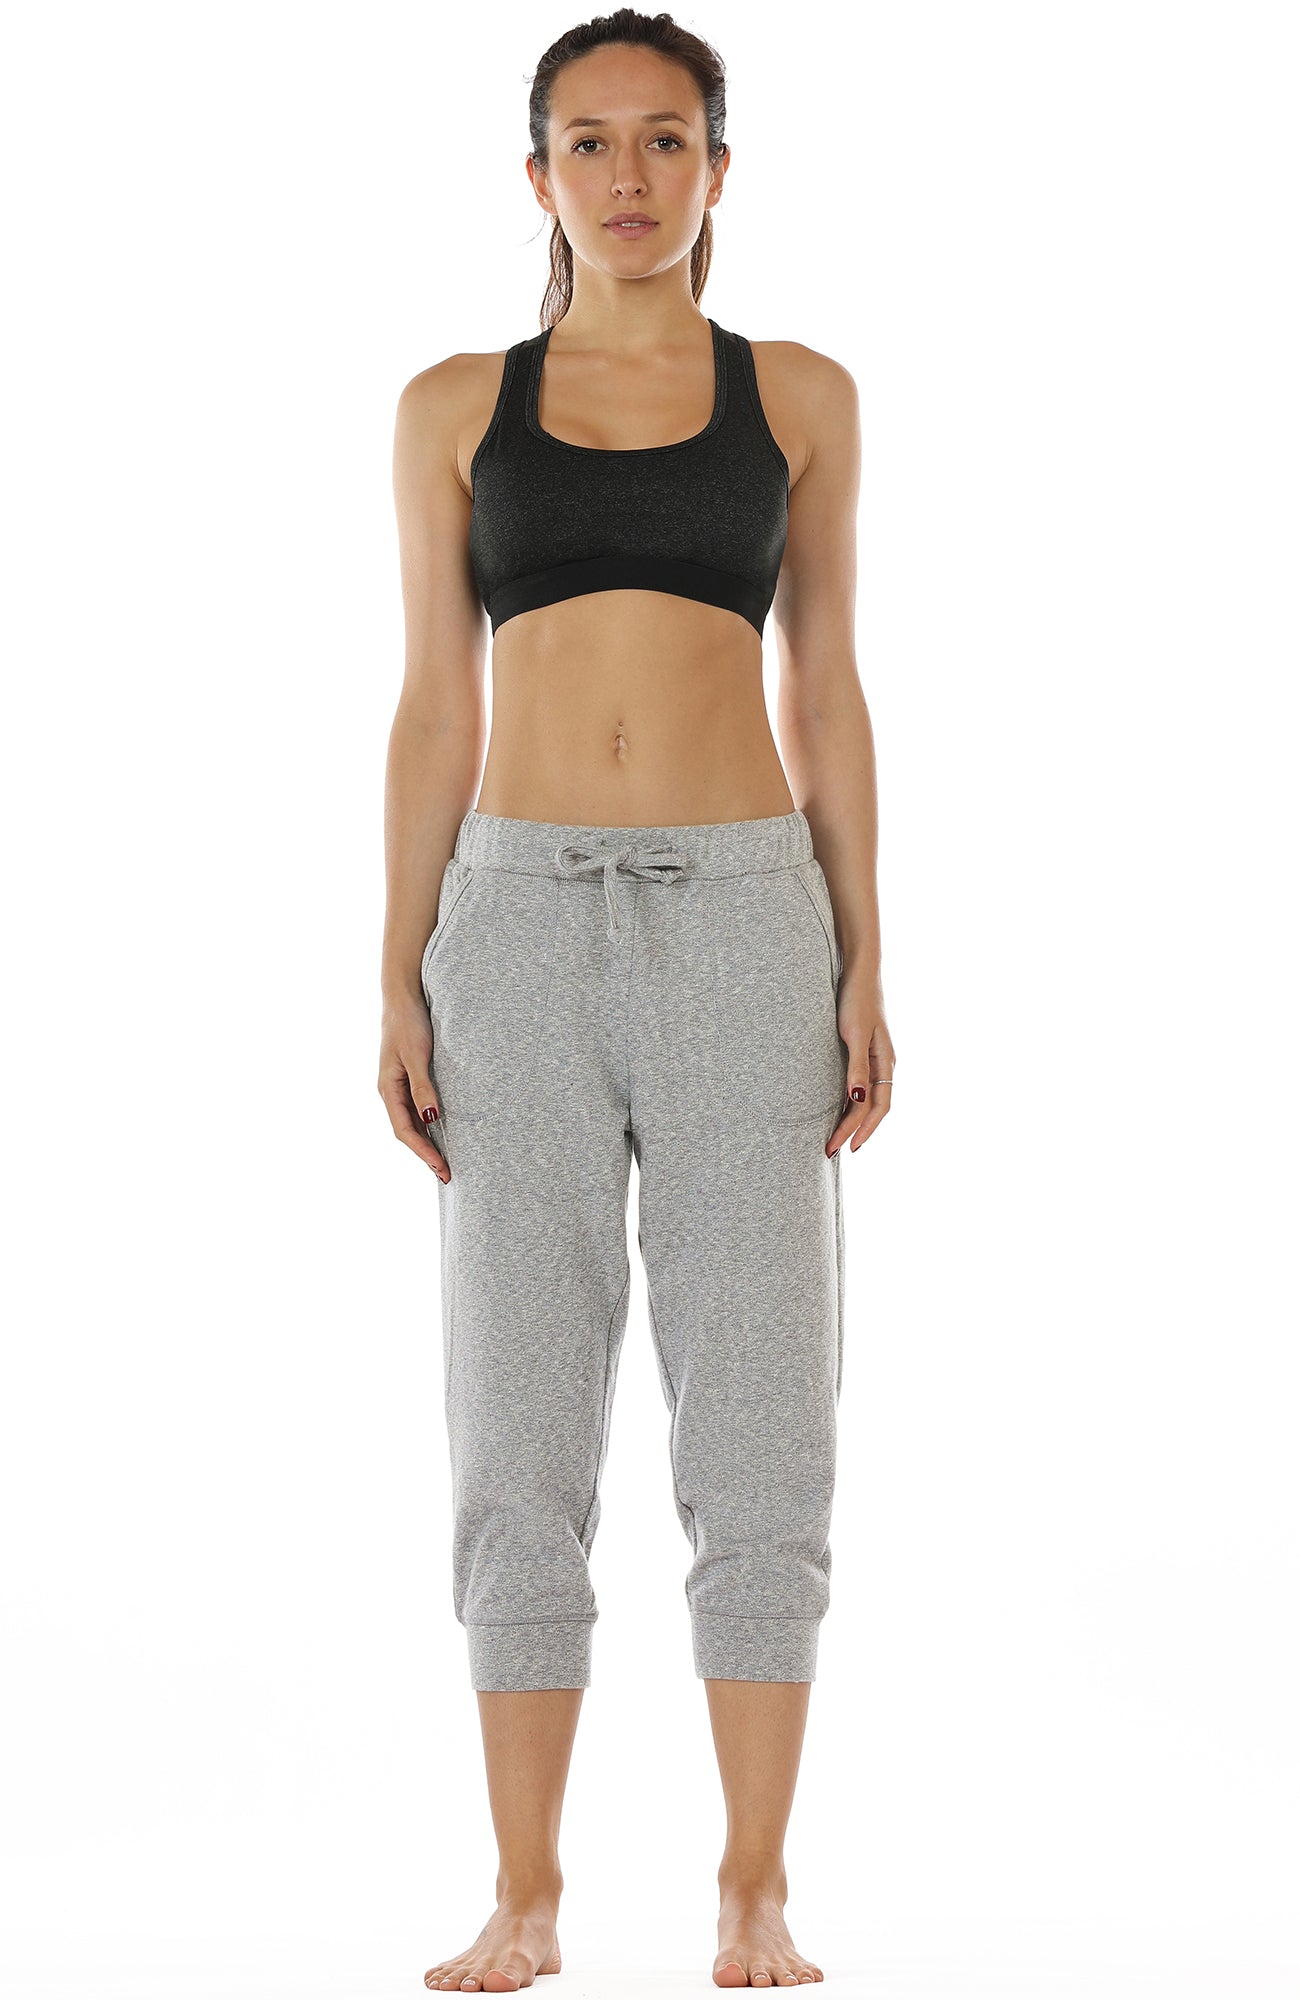 icyzone Womens Joggers Sweatpants - Athletic Lounge Cotton Terry